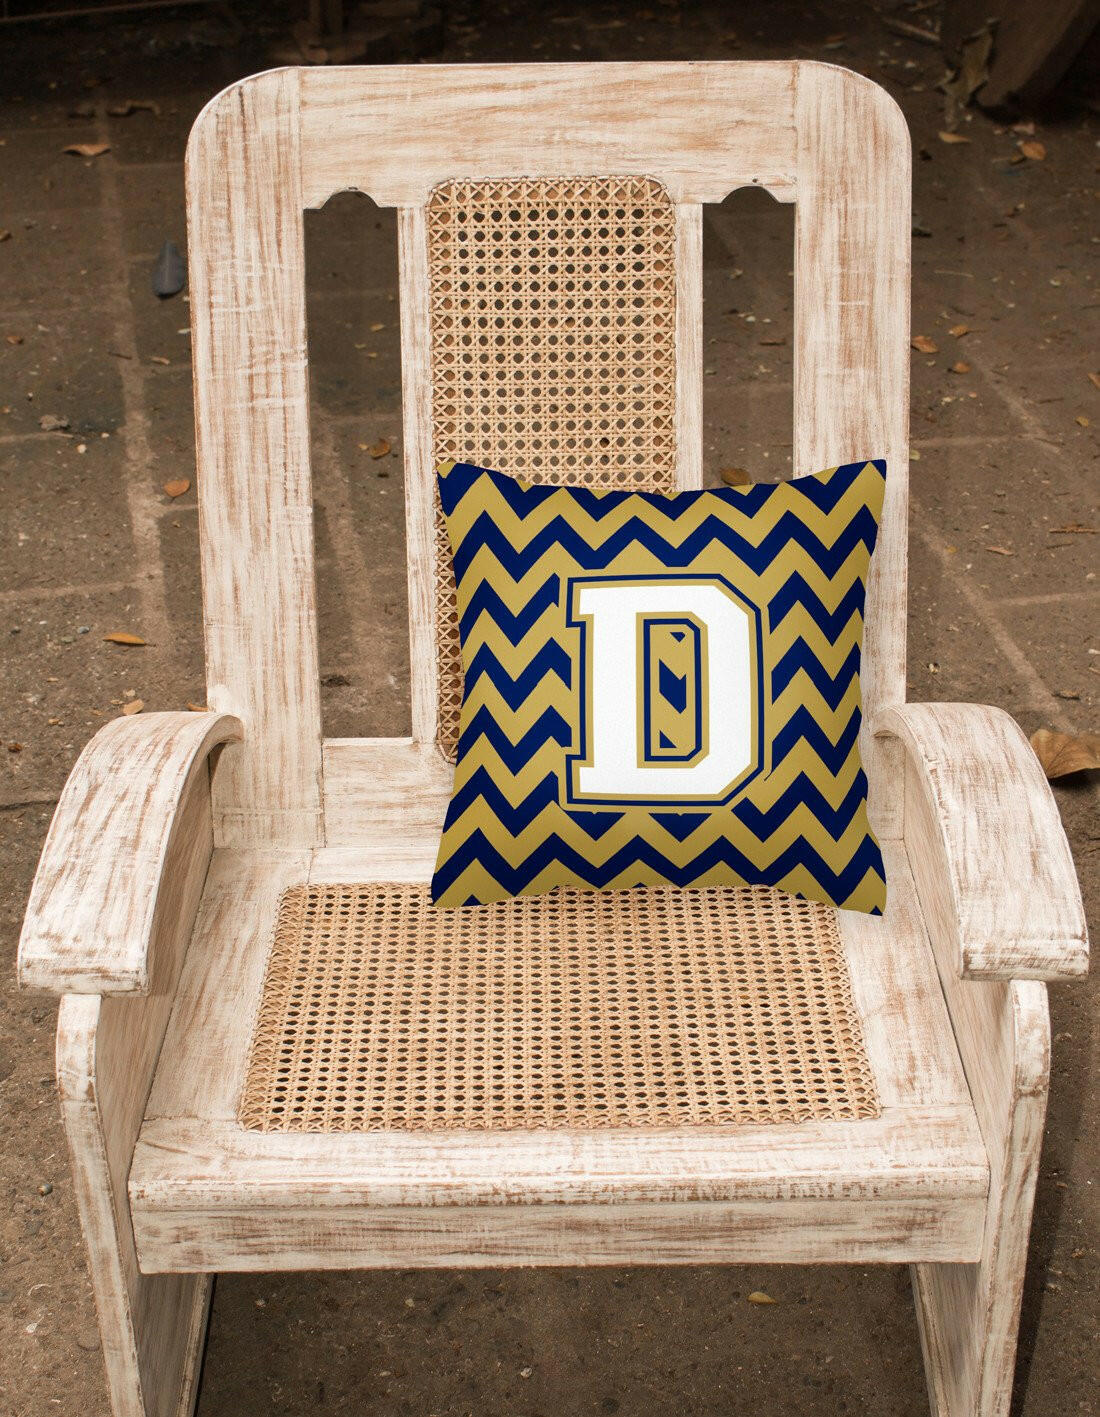 Letter D Chevron Navy Blue and Gold Fabric Decorative Pillow CJ1057-DPW1414 by Caroline's Treasures